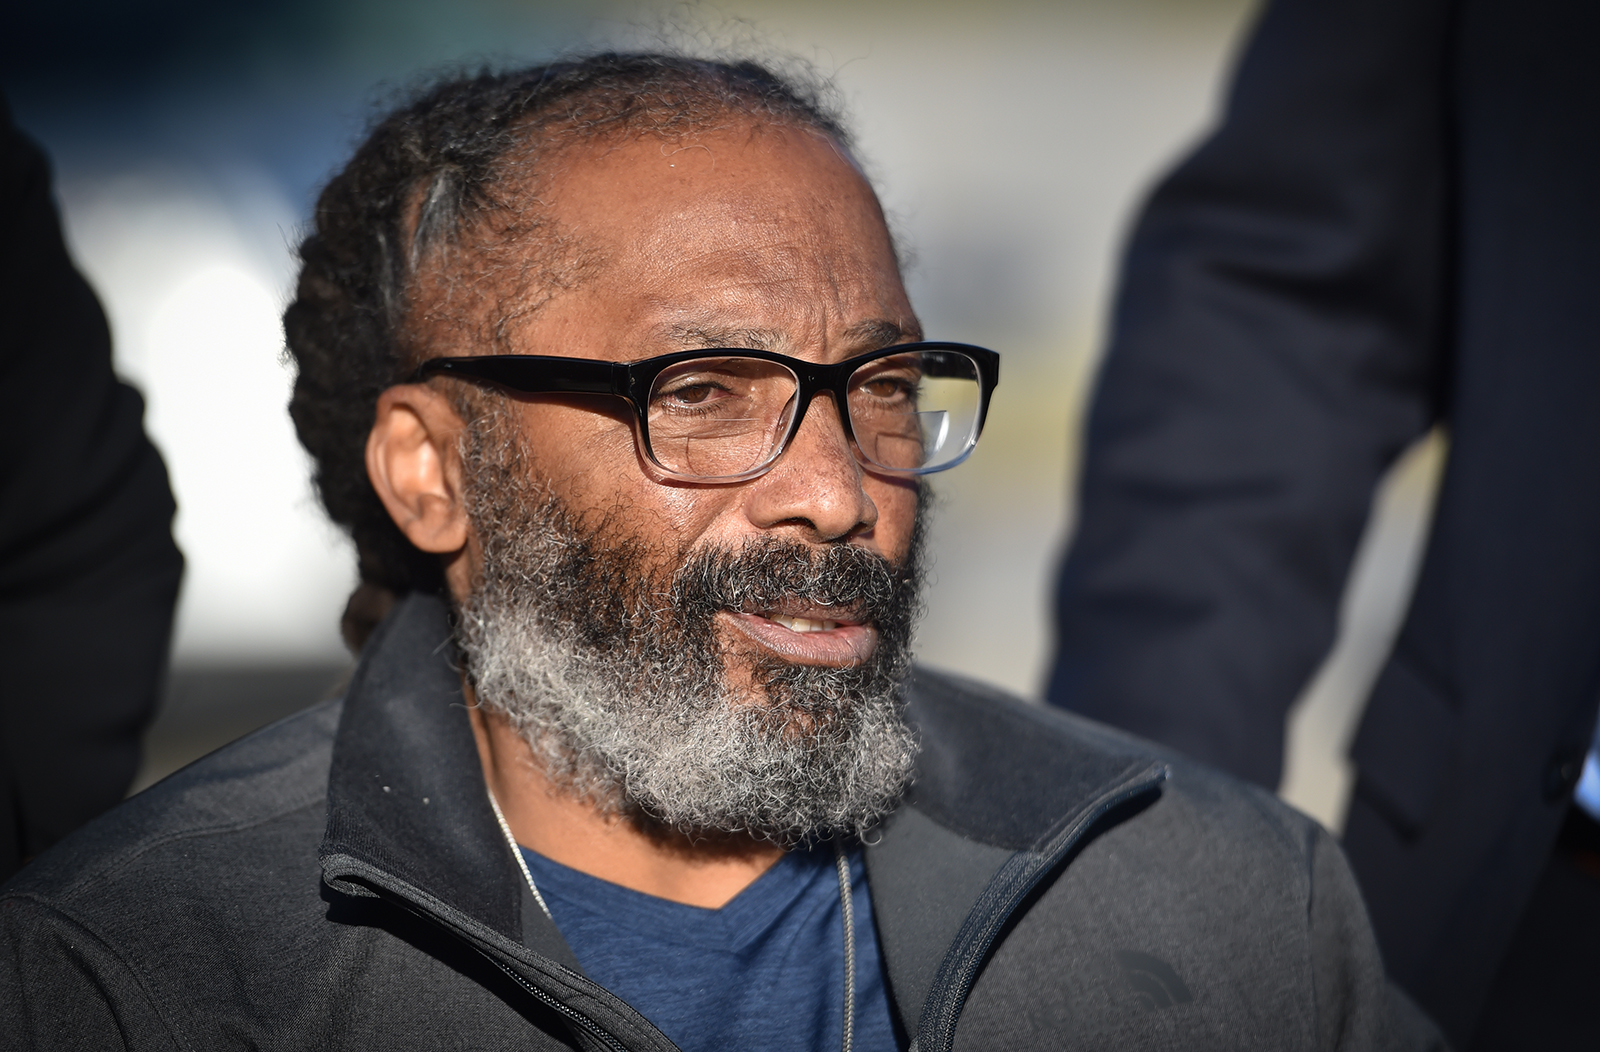 $1.5 Million Raised By Midwest Innocence Project For Exonerated Black Man Kevin Strickland Who Was Wrongly Convicted Of Murder In 1979